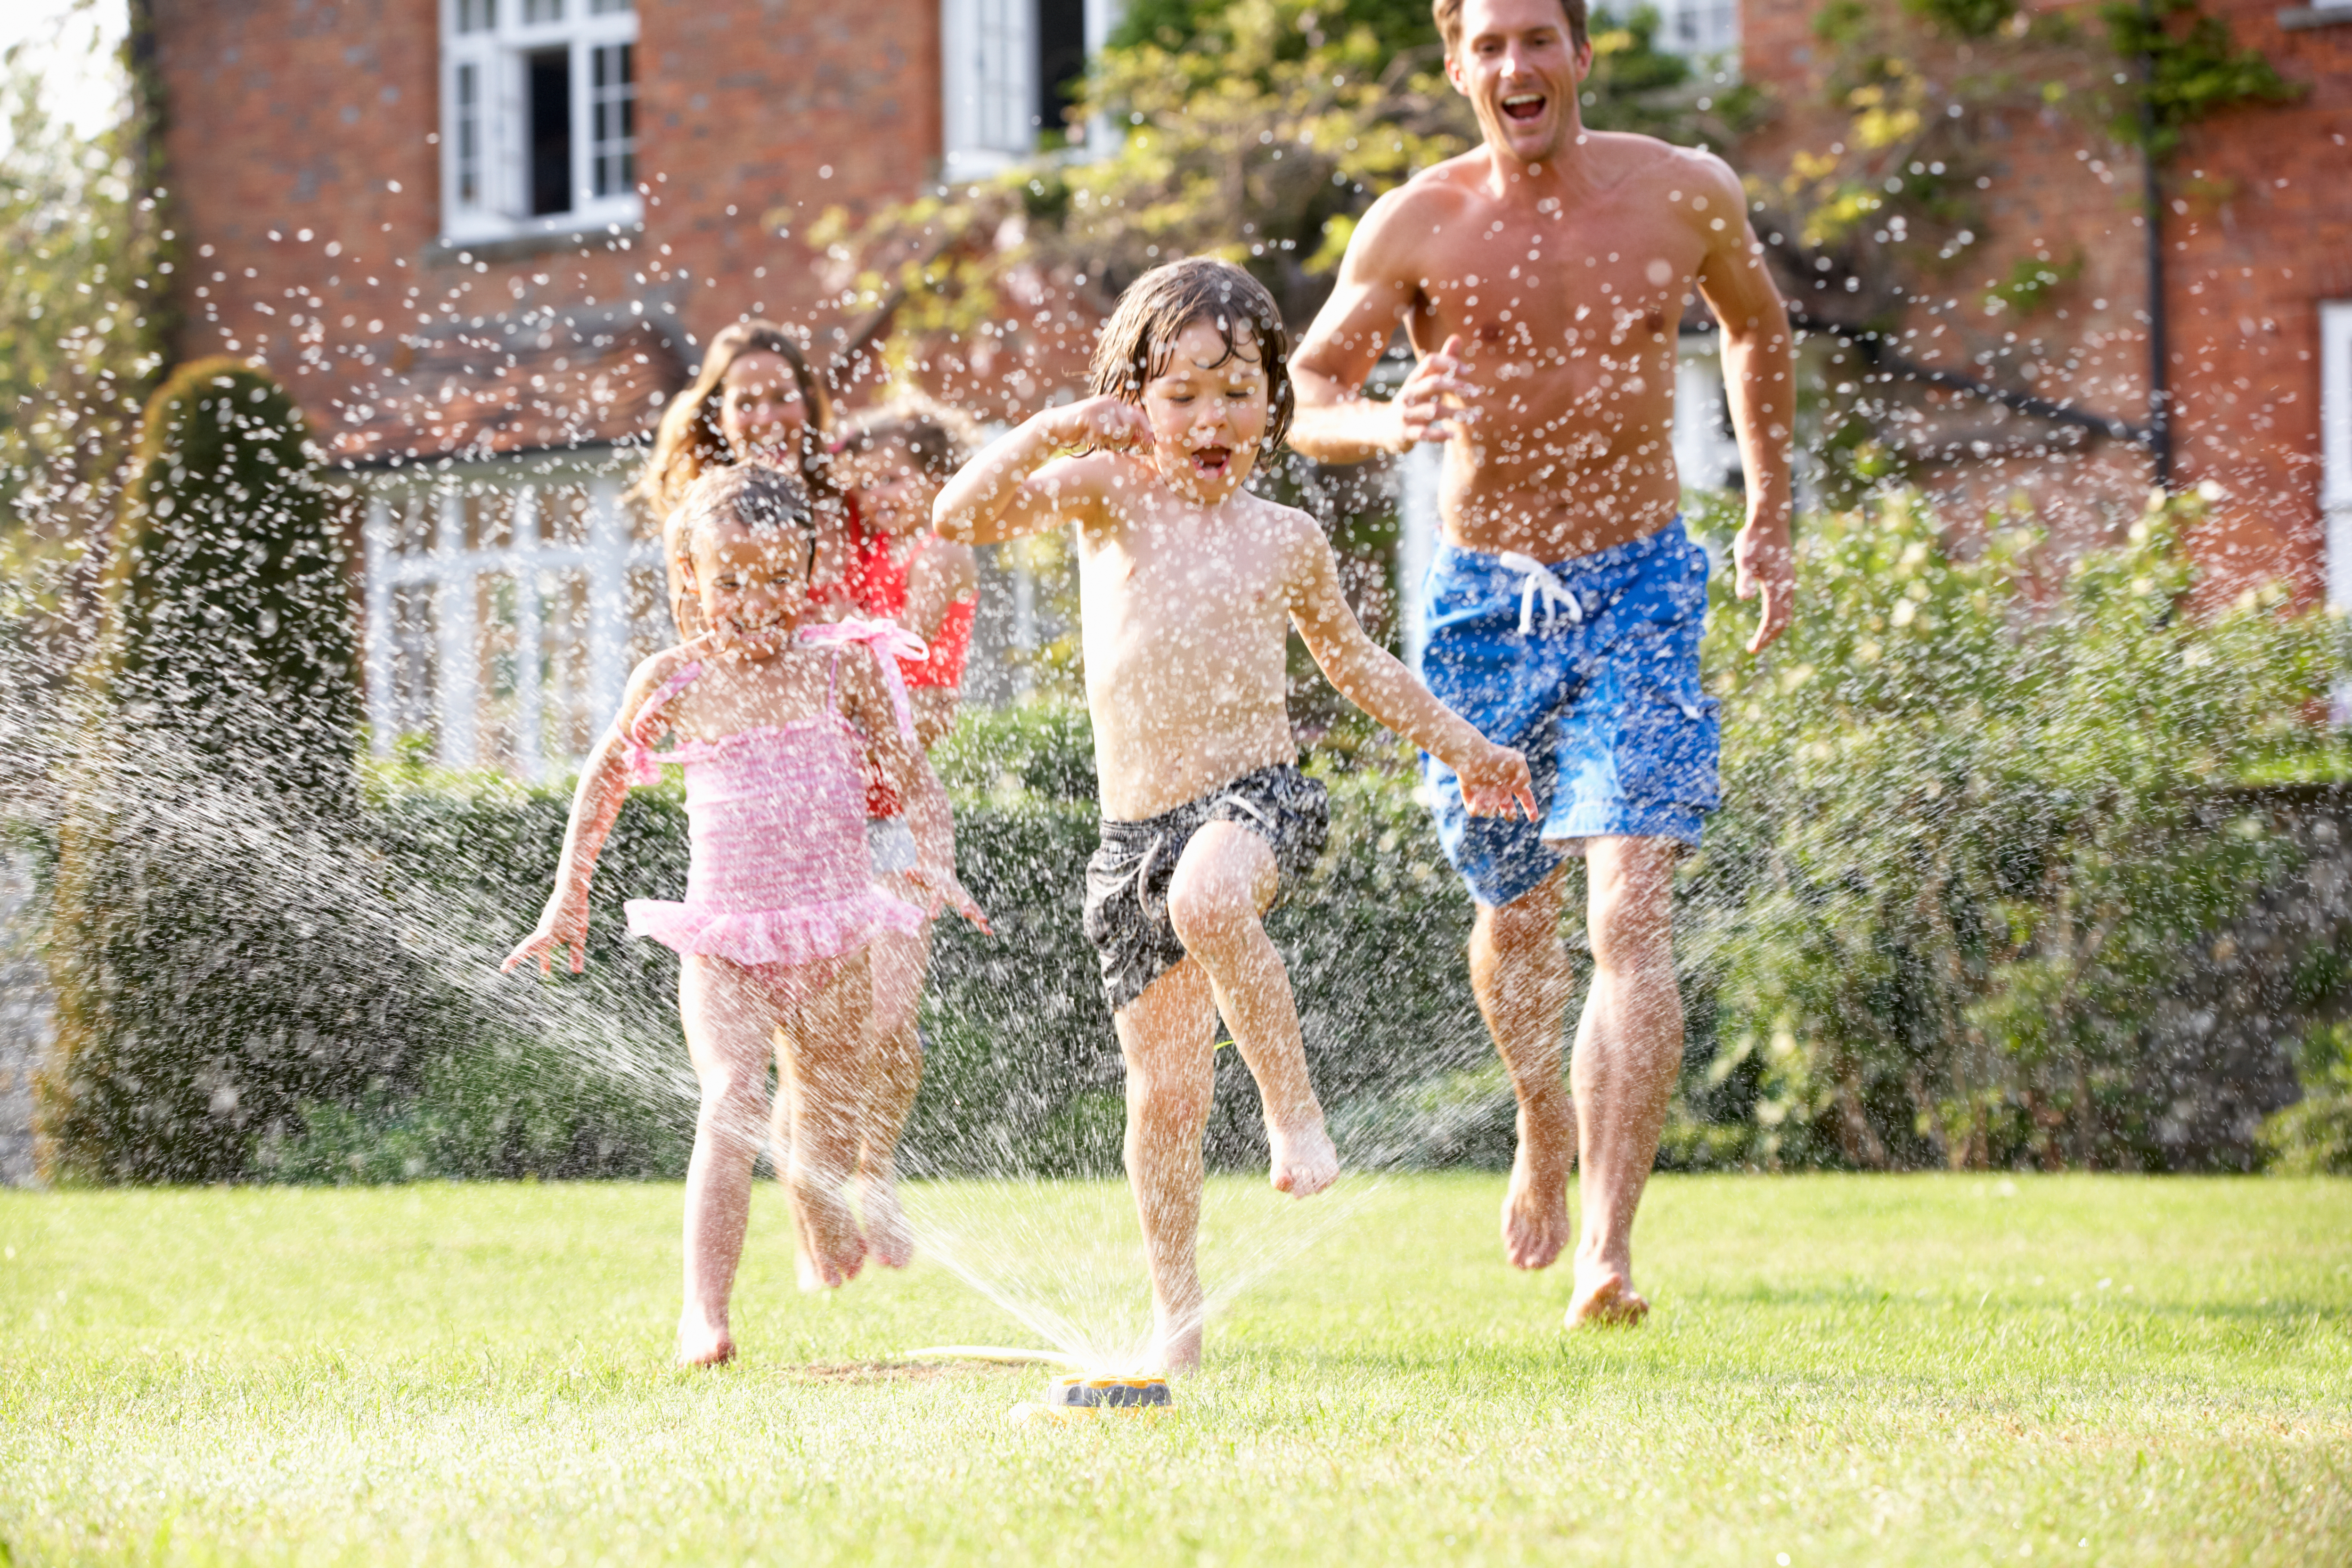 South Jersey family playing in the water sprinkler outside